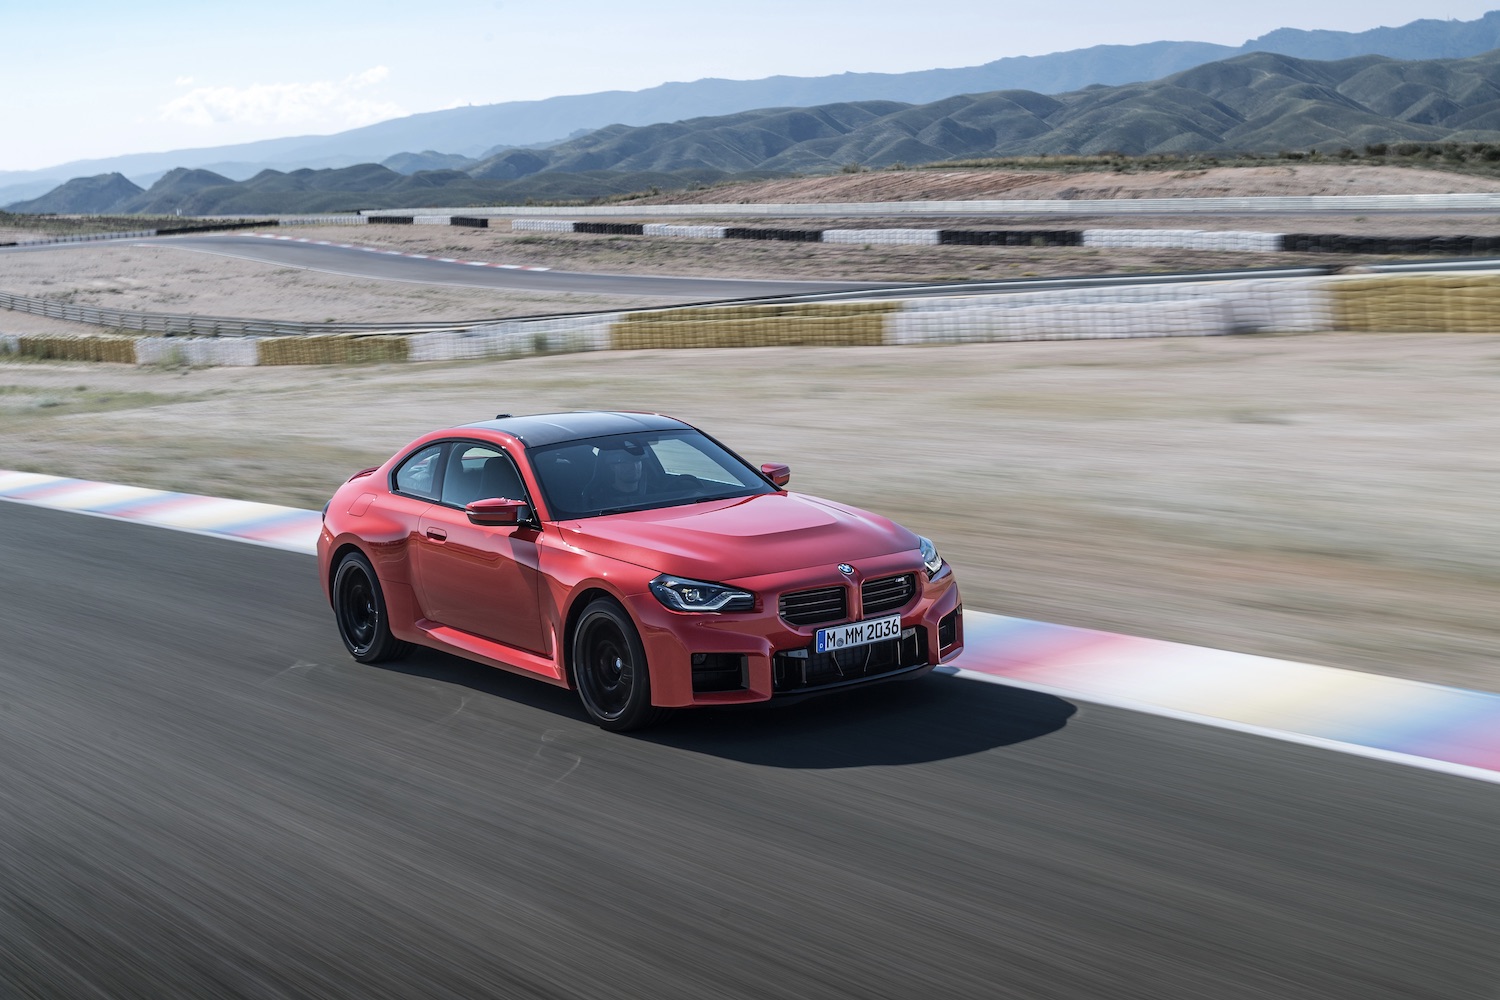 2023 BMW M2 on a race track with dirt and mountains in the back.